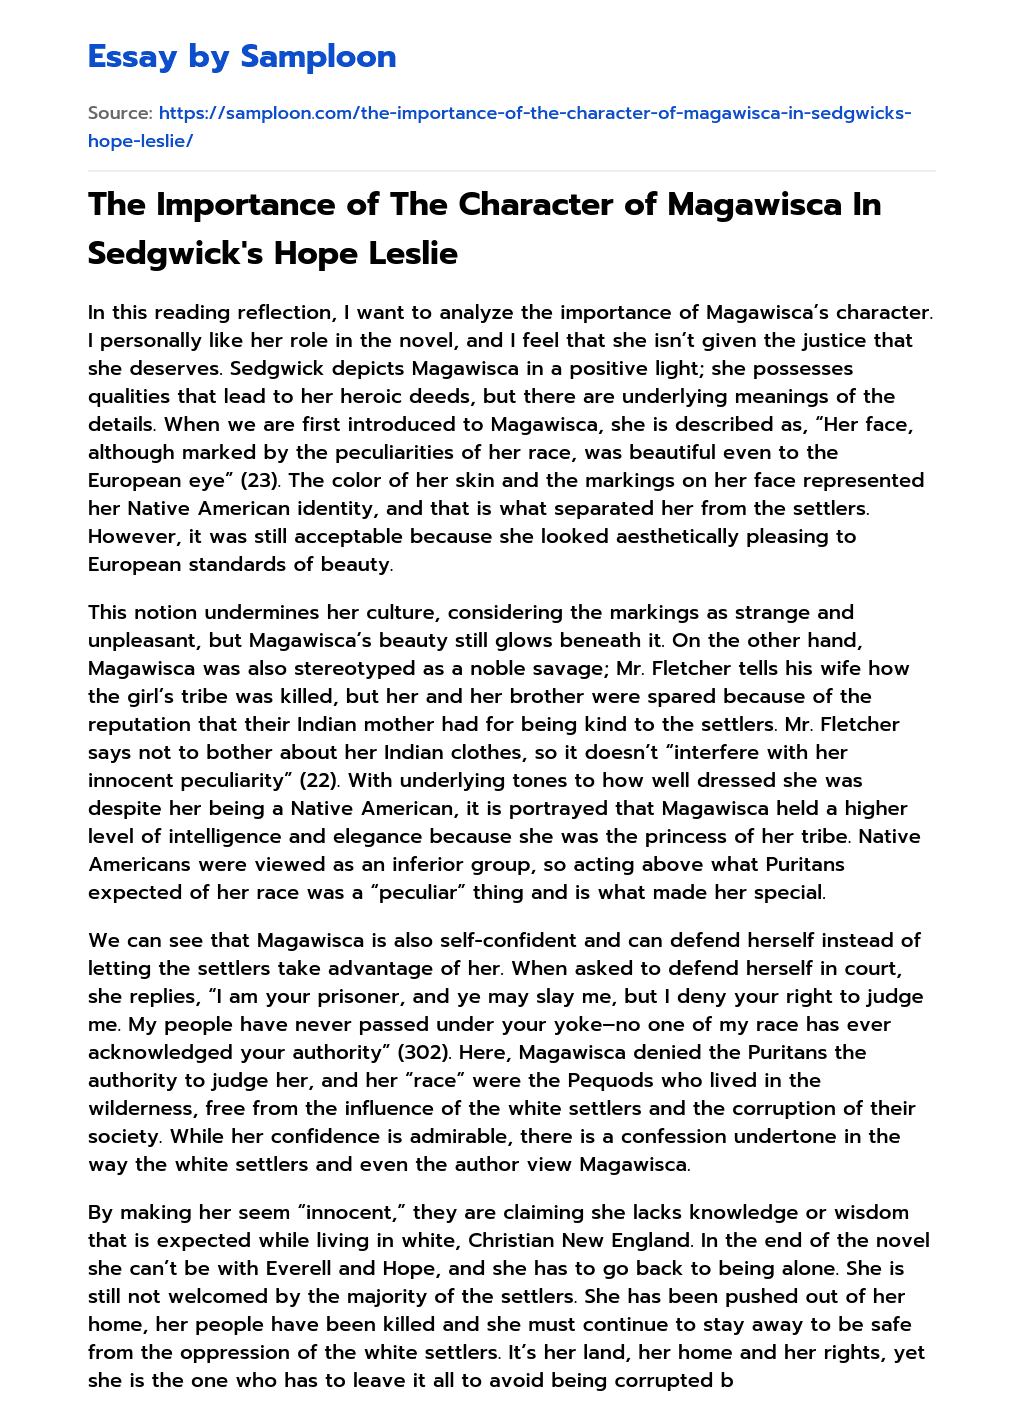 The Importance of The Character of Magawisca In Sedgwick’s Hope Leslie essay